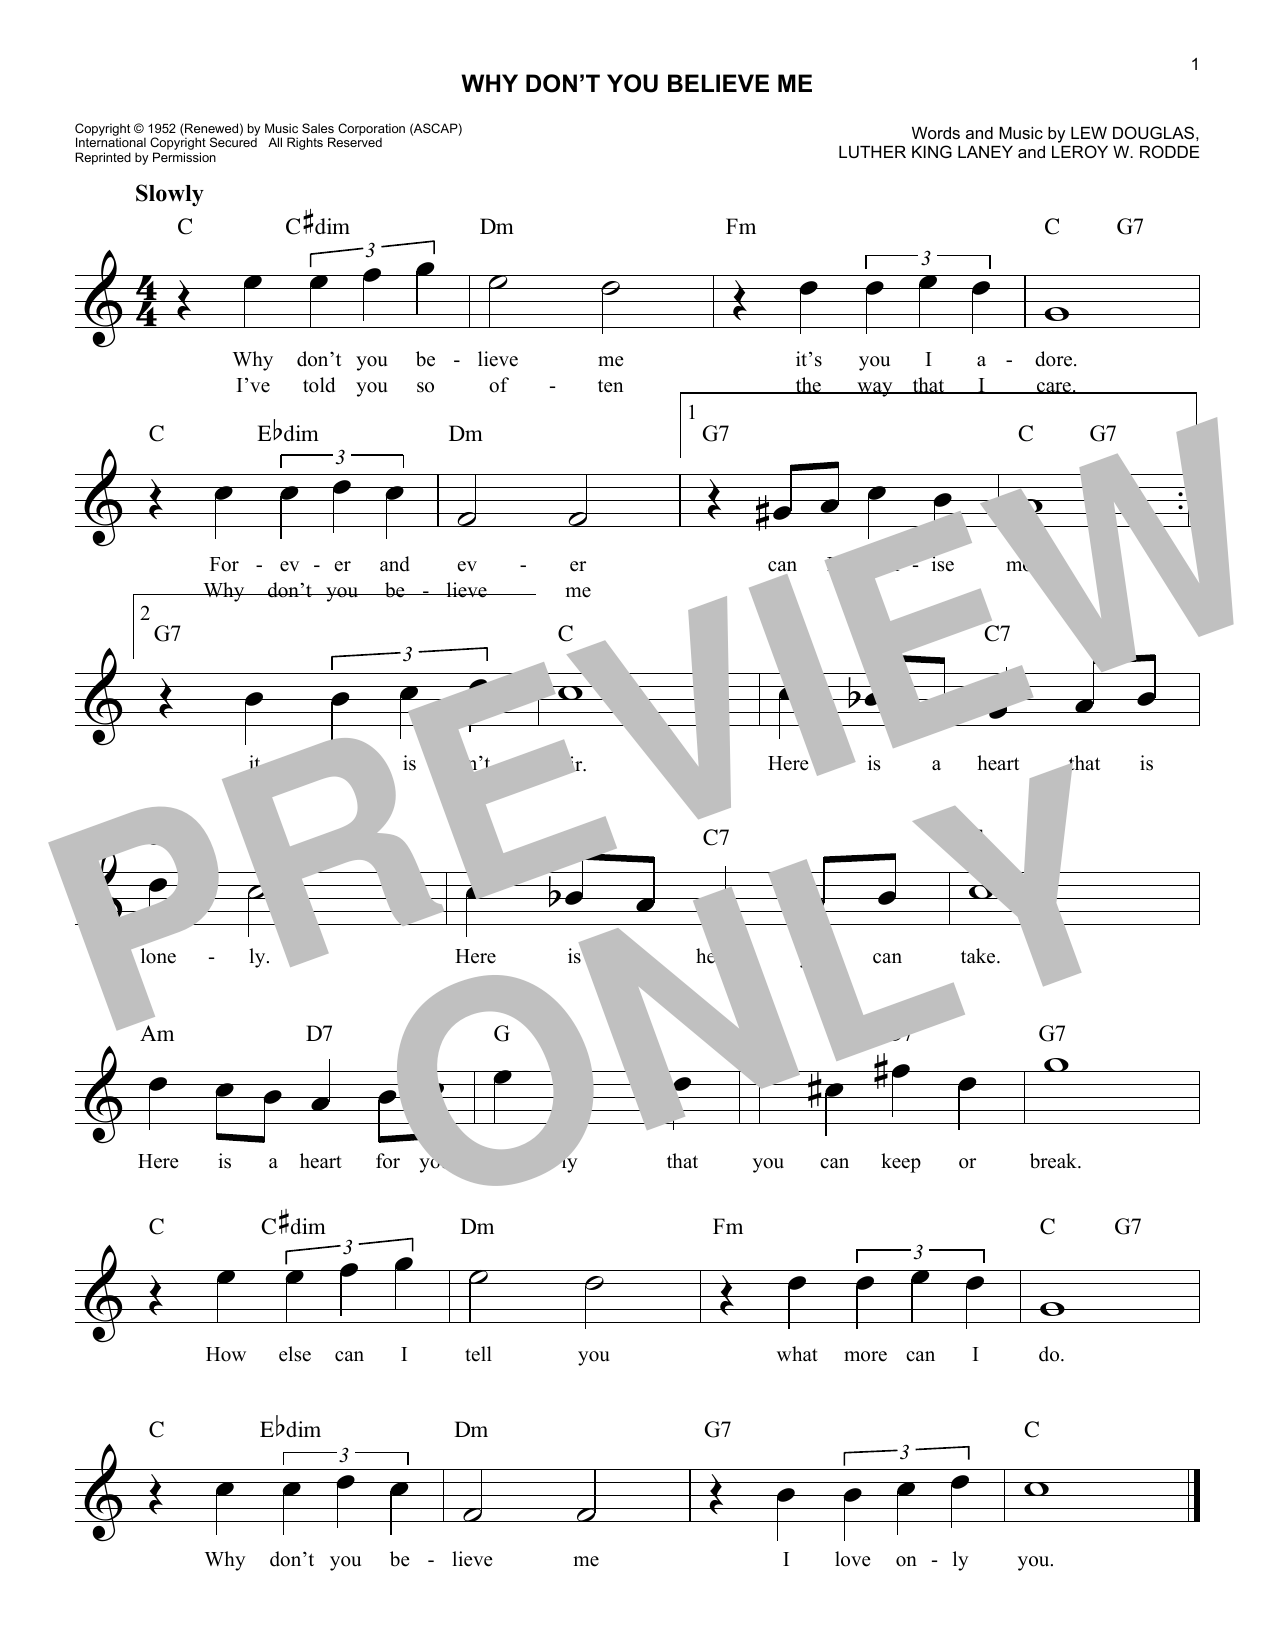 Patti Page Why Don't You Believe Me sheet music notes and chords. Download Printable PDF.